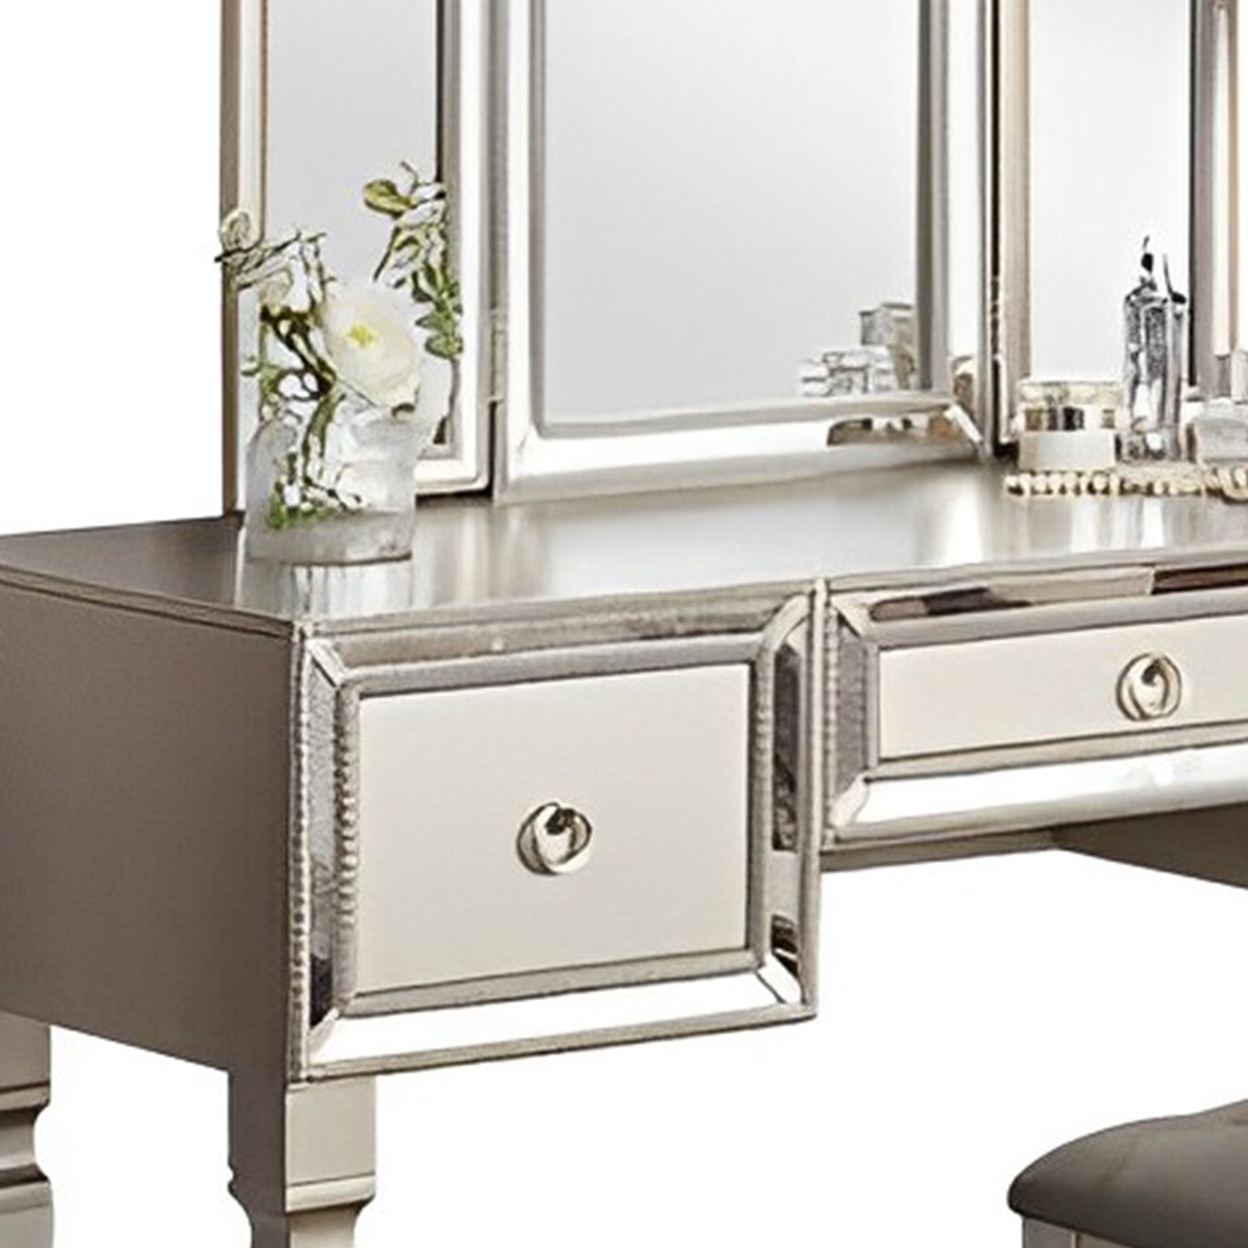 Thuy 60 Inch Vanity Desk Set, Upholstered Stool, Trifold Mirror, Silver